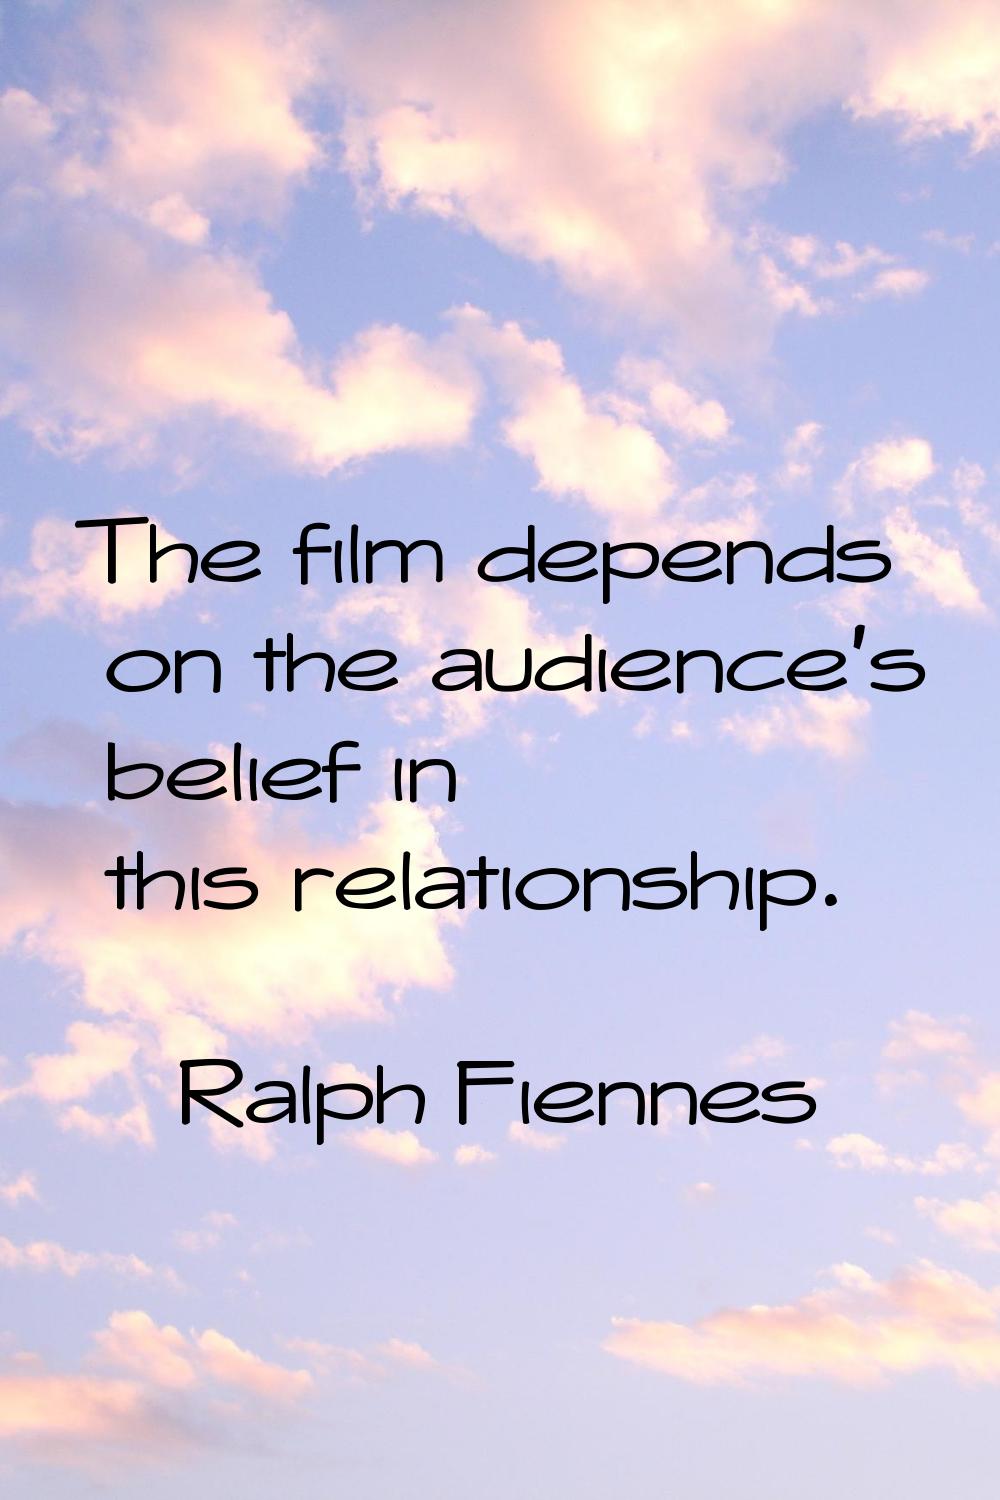 The film depends on the audience's belief in this relationship.